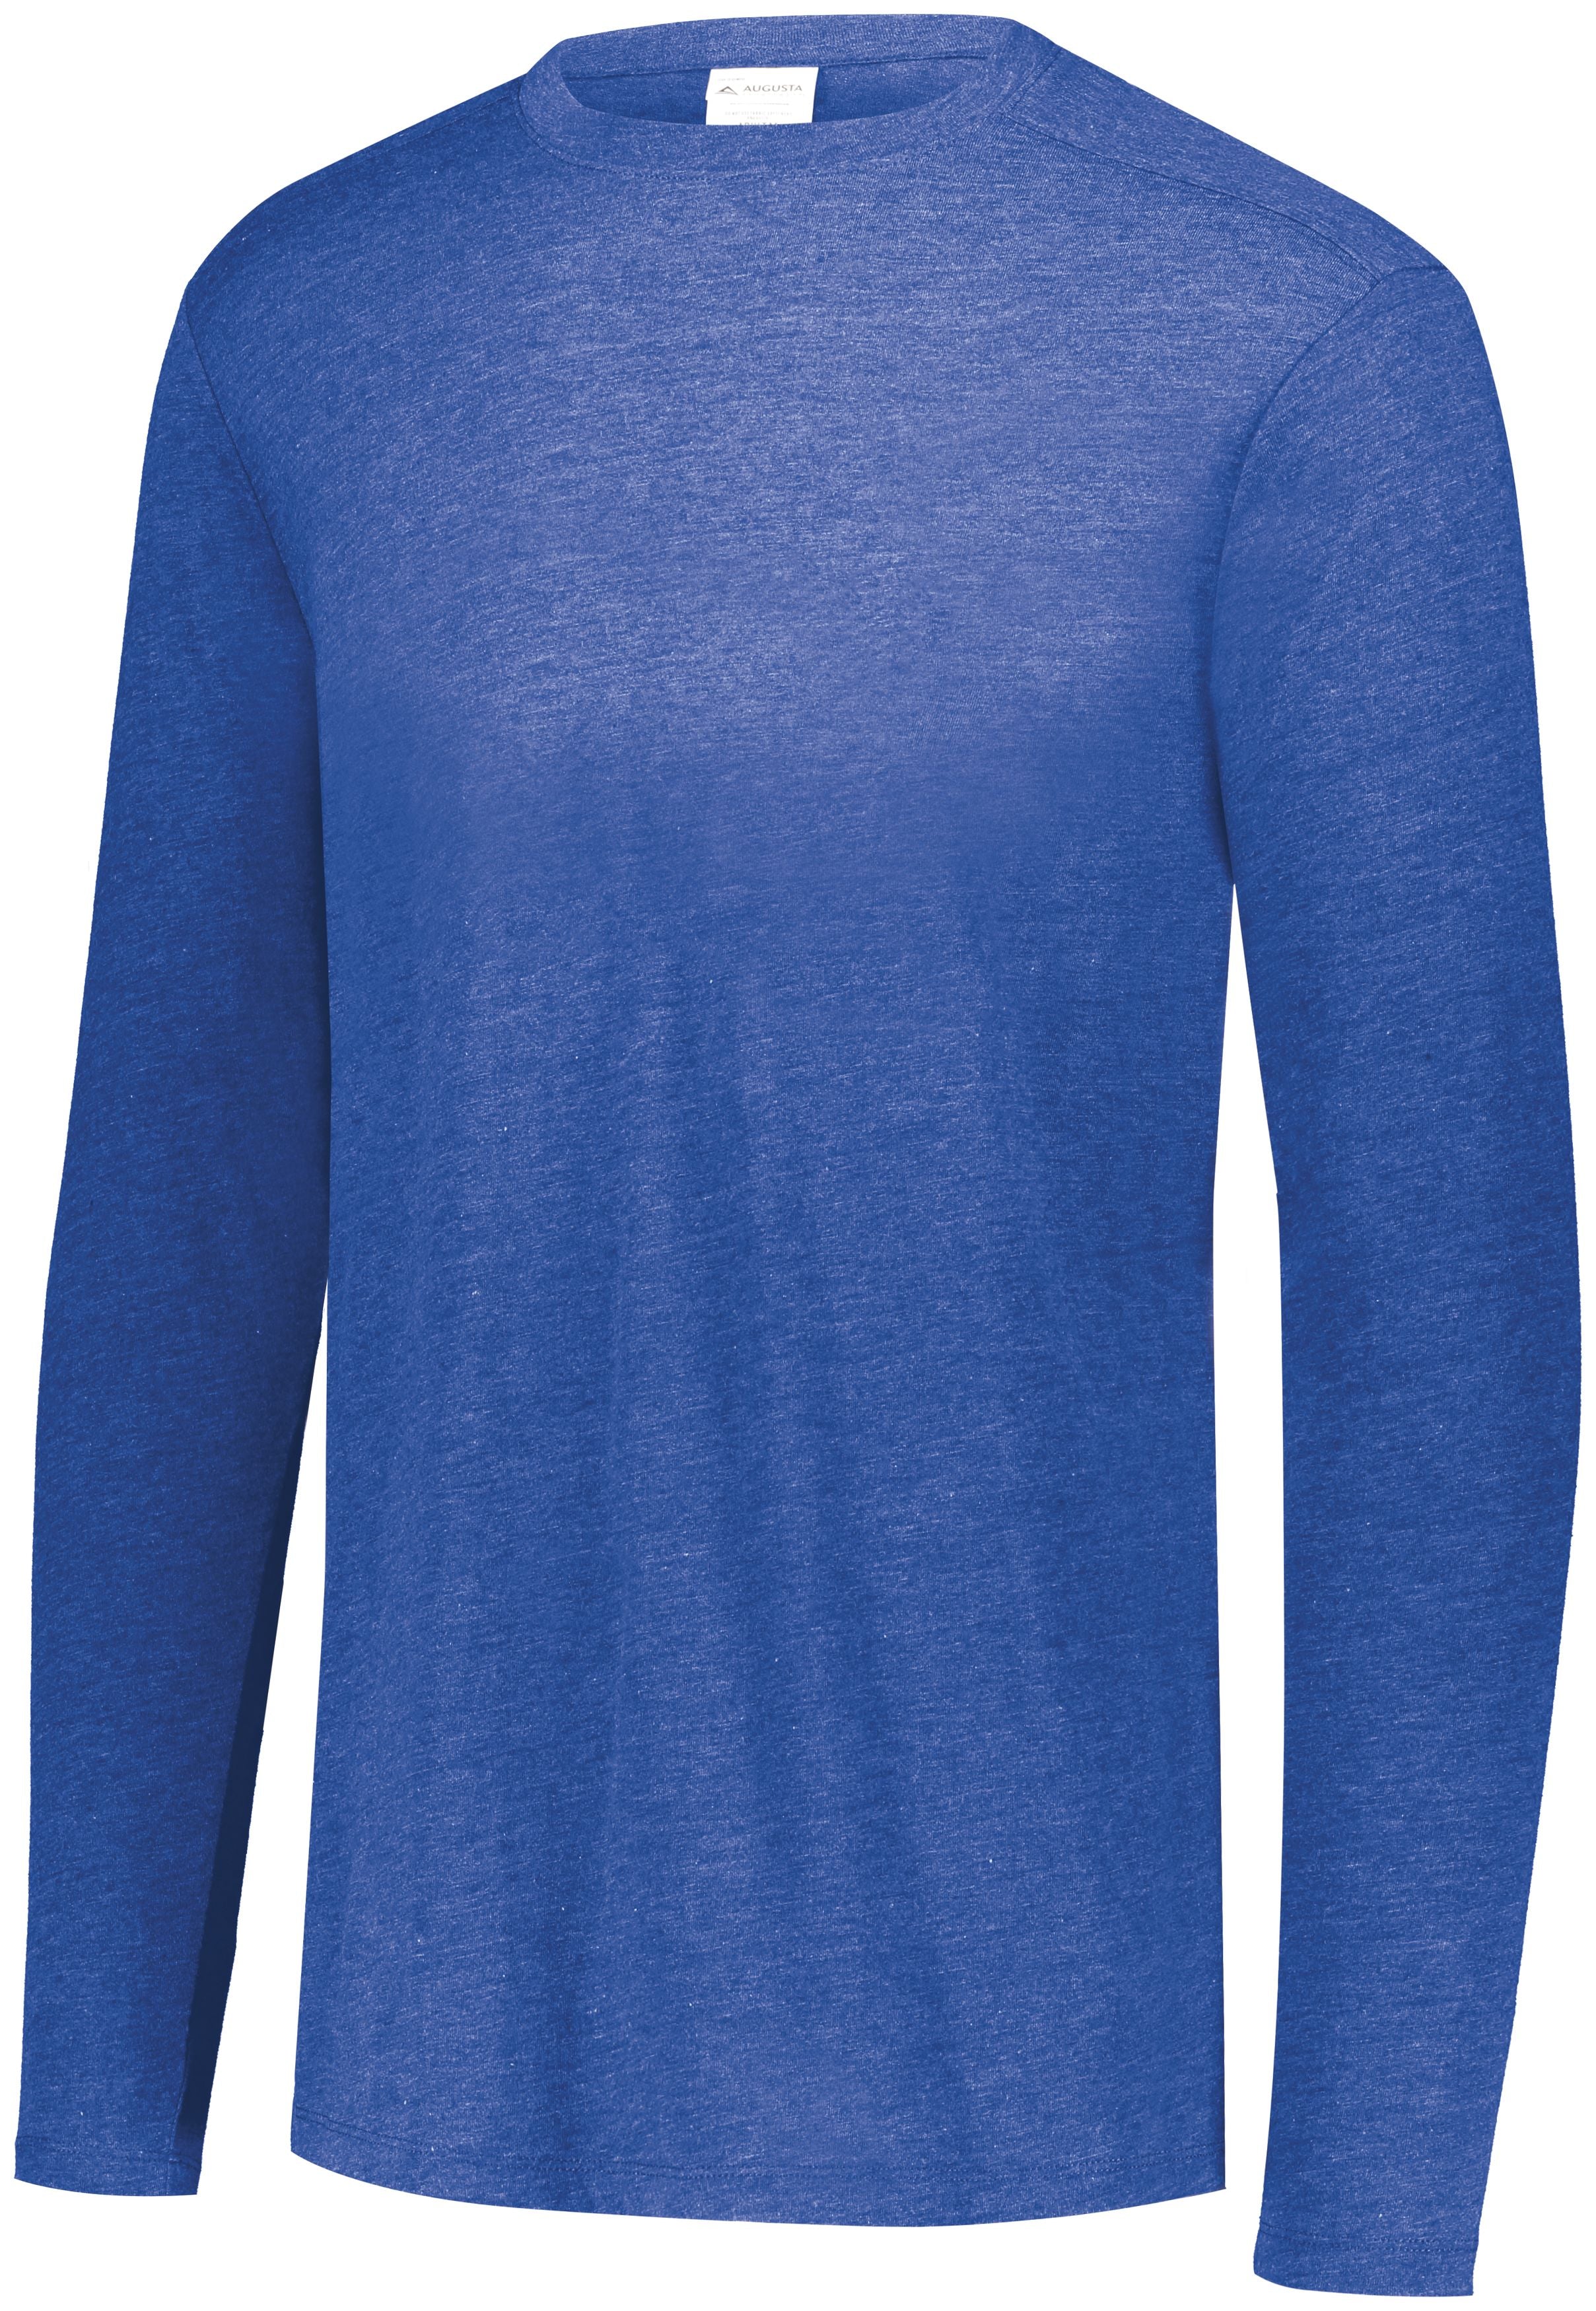 Augusta Sportswear Tri-Blend Long Sleeve Crew in Royal Heather  -Part of the Adult, Augusta-Products, Shirts product lines at KanaleyCreations.com